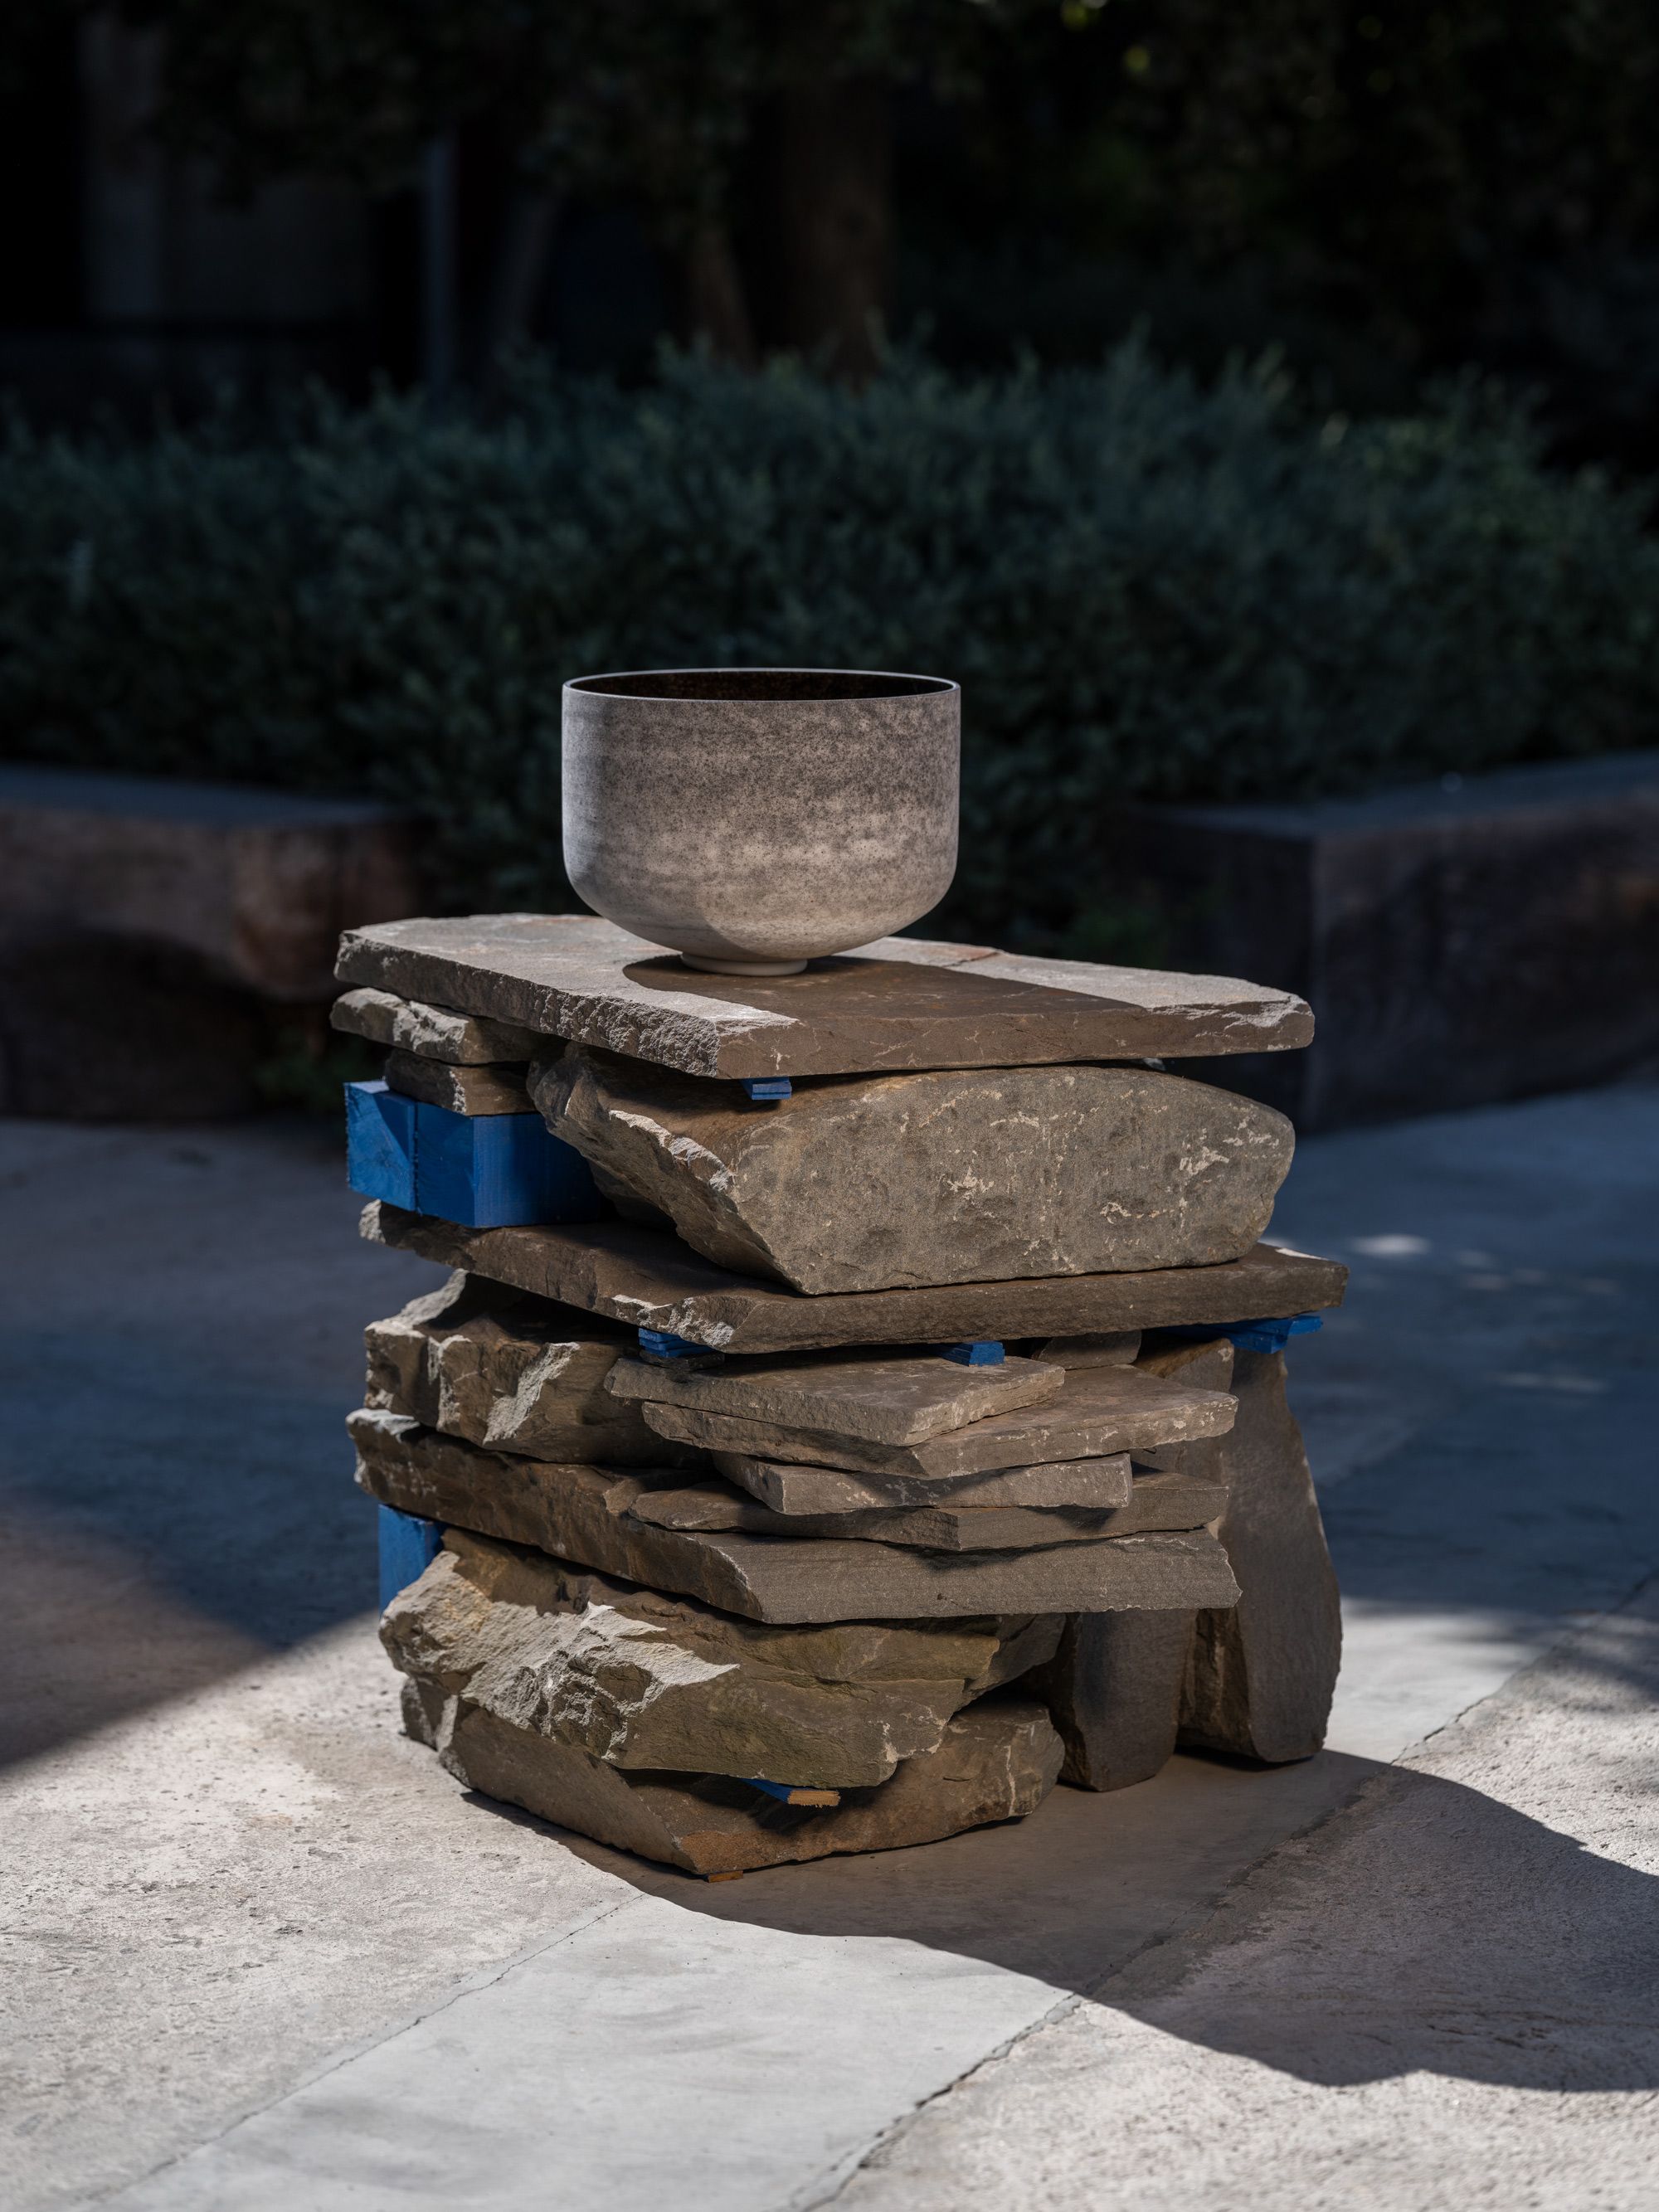 Stacked Stones/Vibrating Cycles, 2021 (detail)